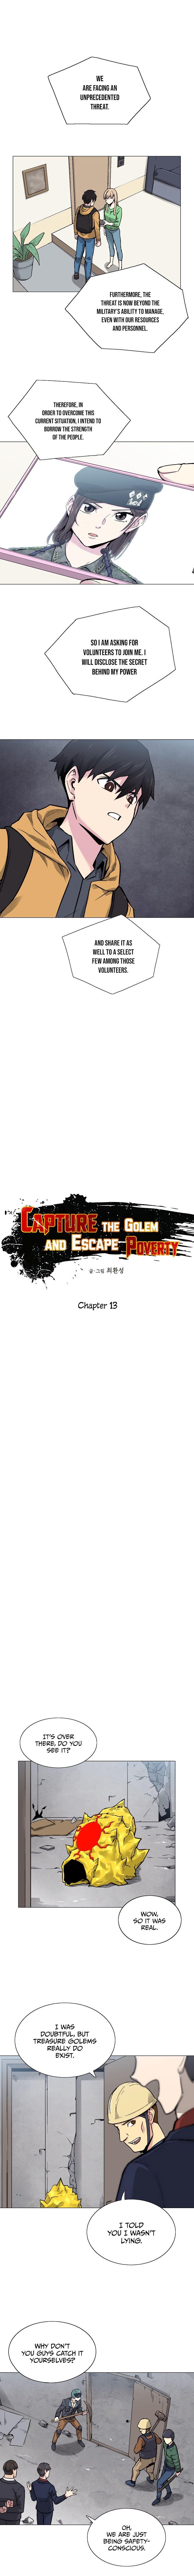 Capture The Golem And Escape Povertyv - Page 2